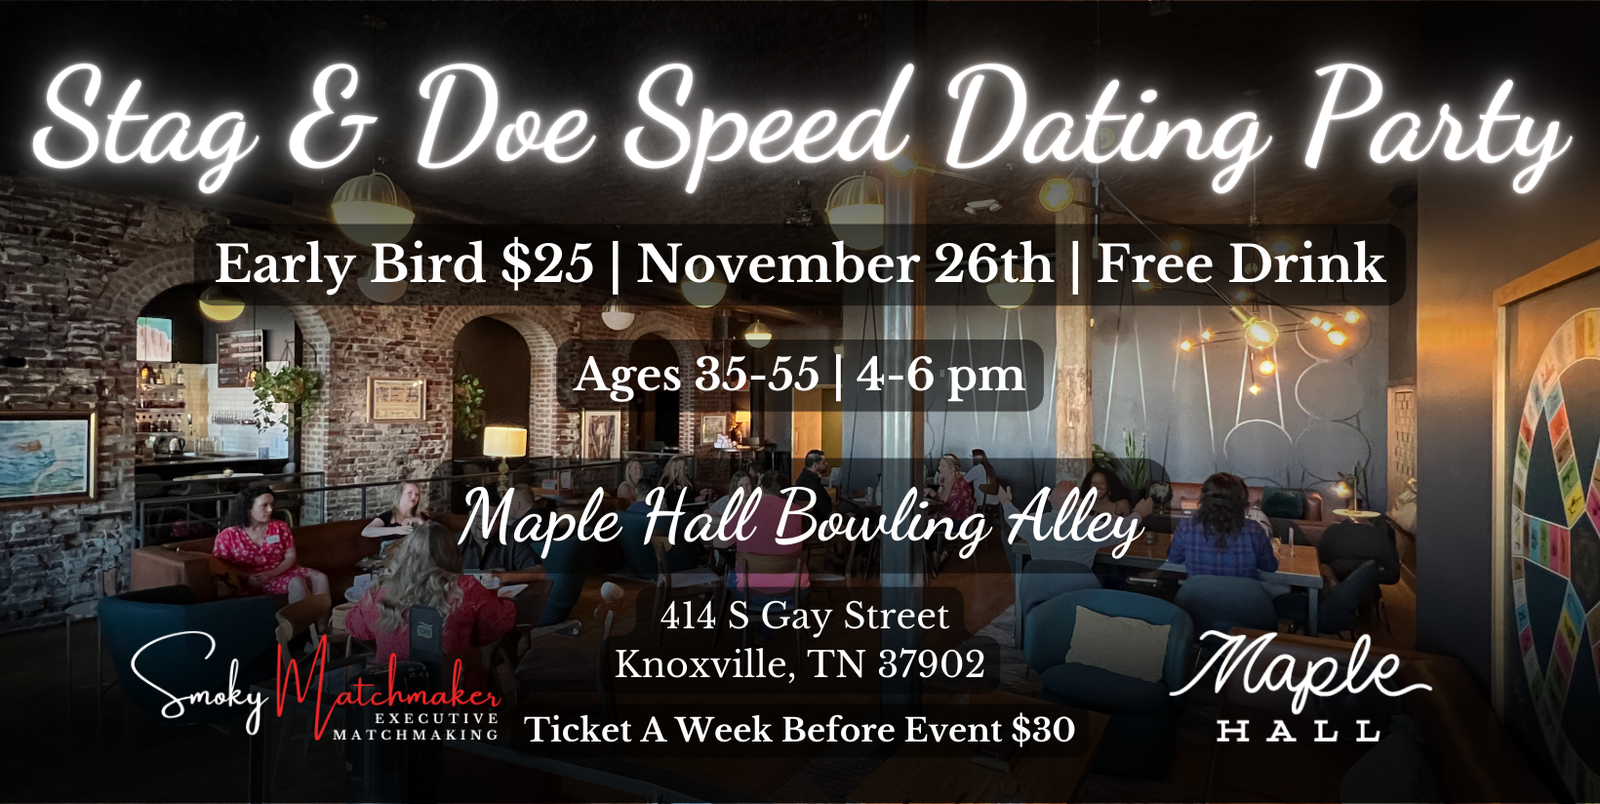 Stag And Doe Speed Dating Party in November!